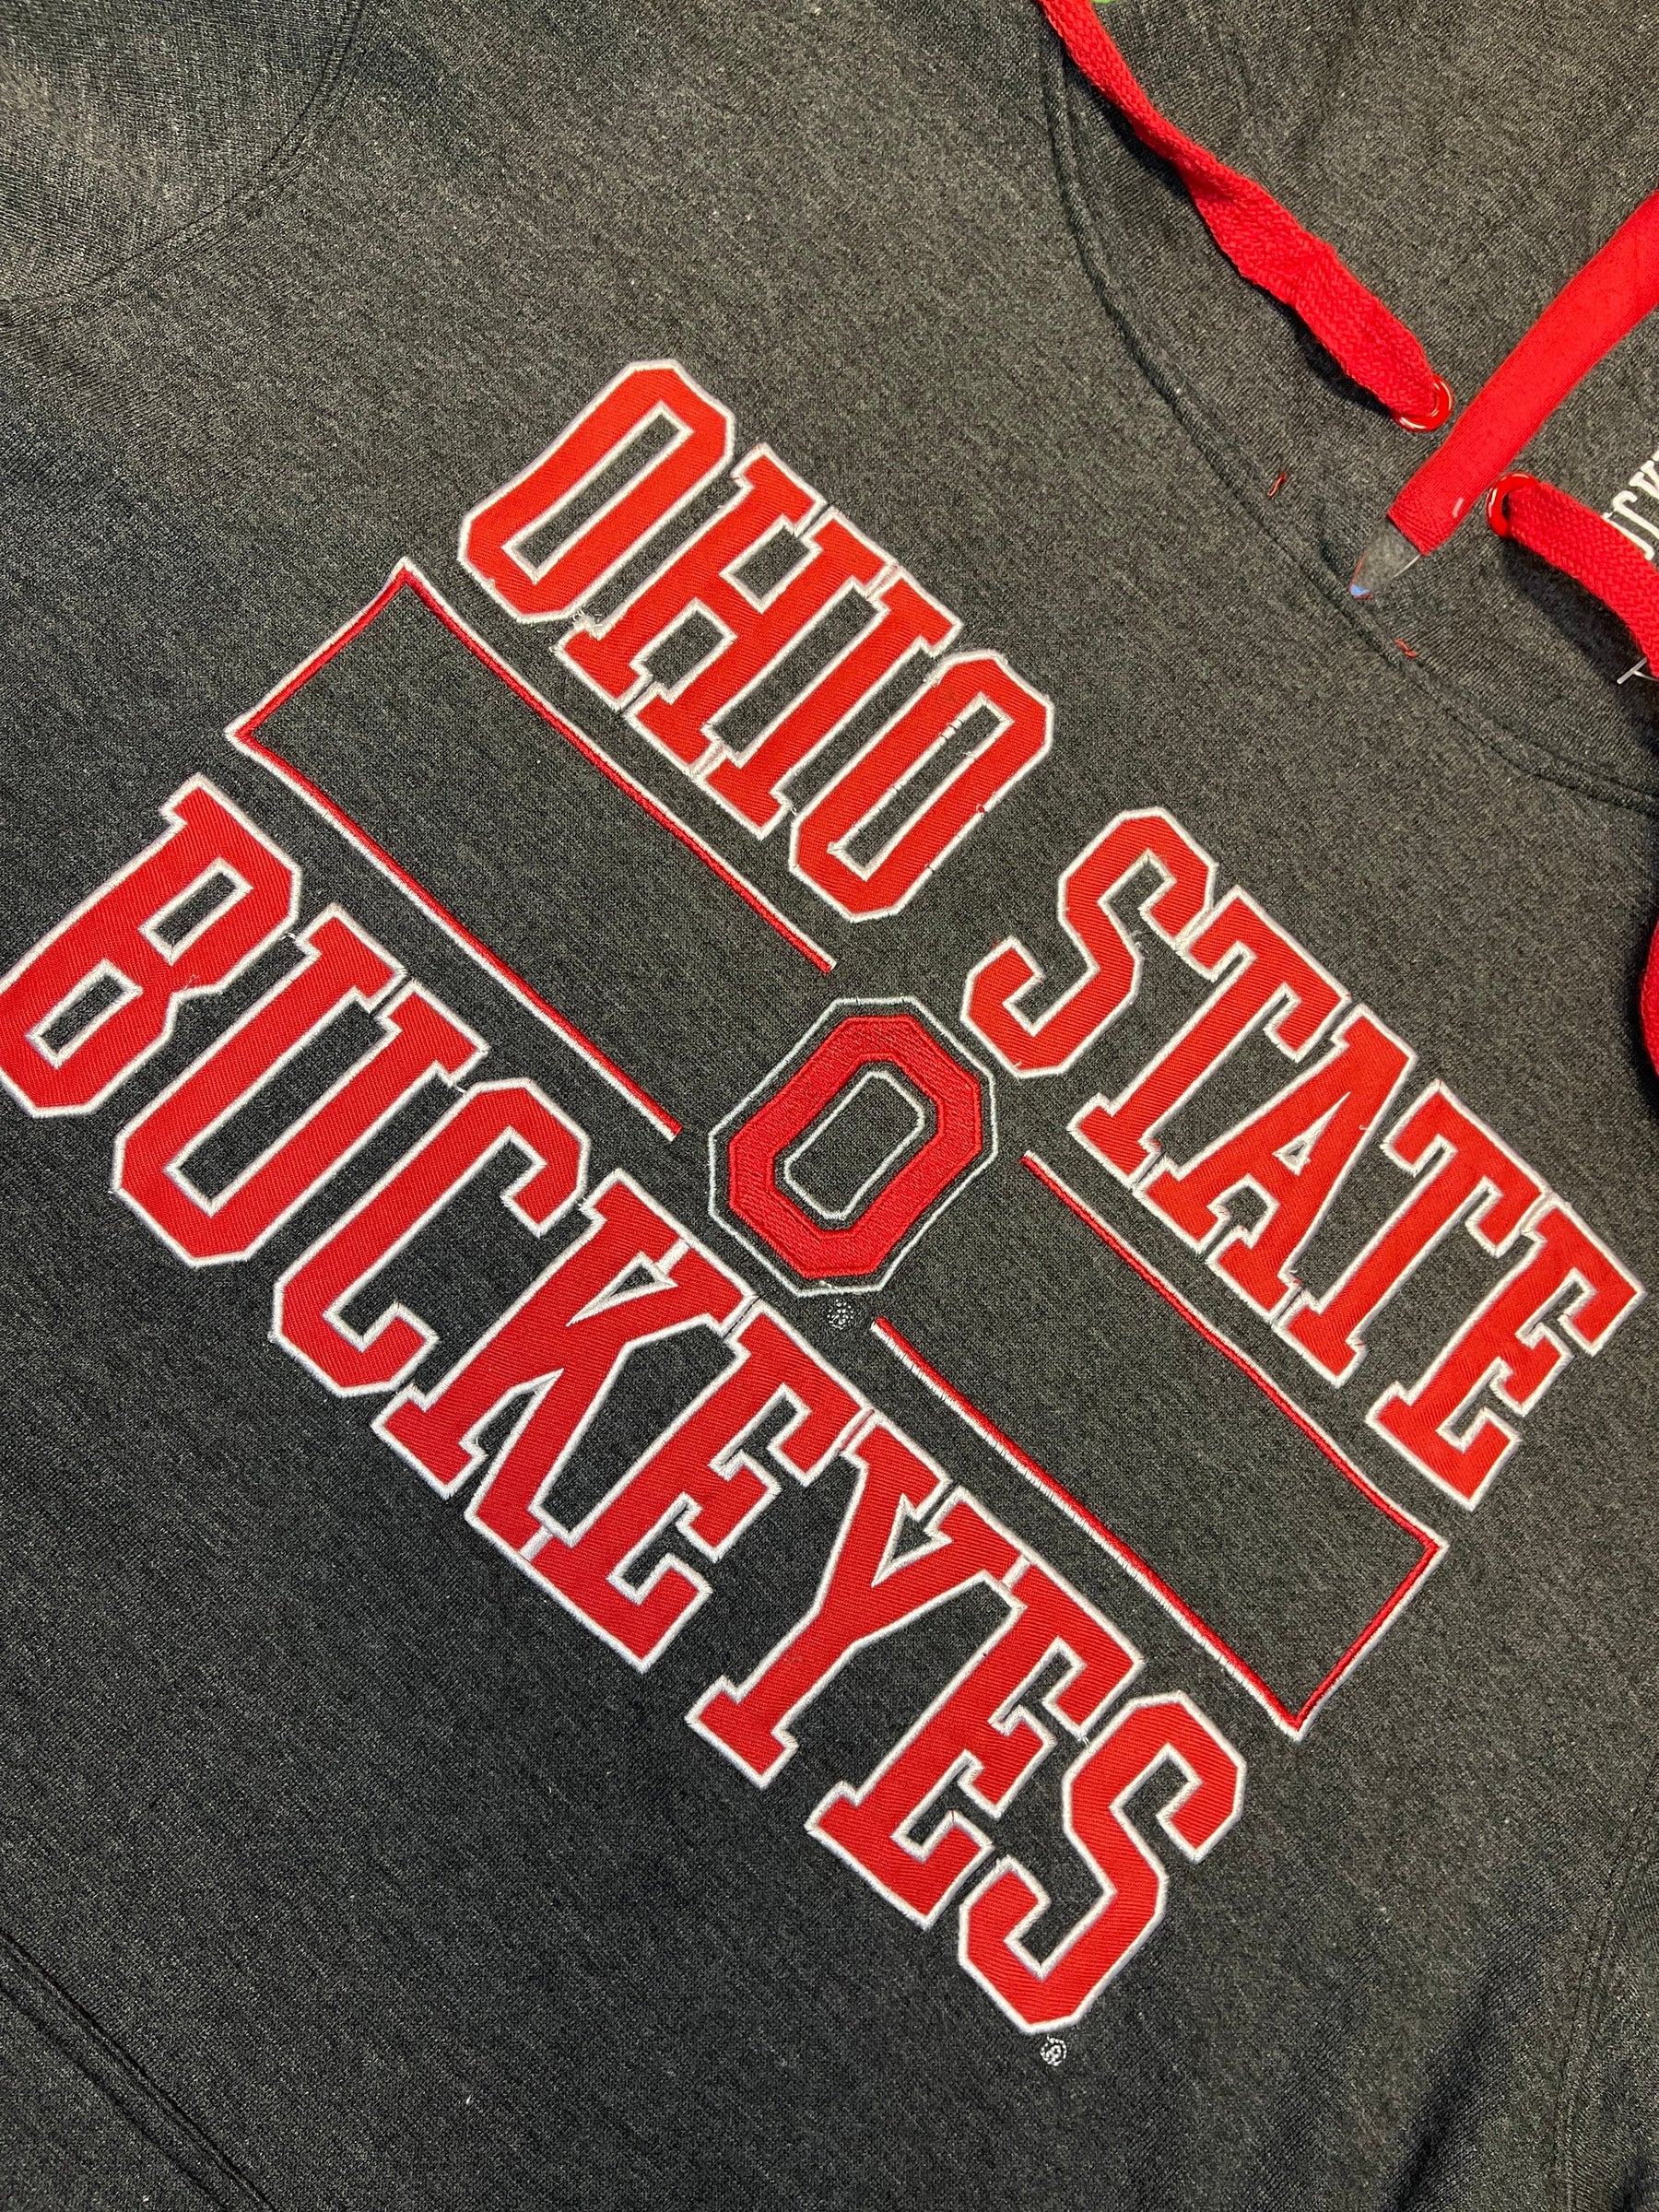 NCAA Ohio State Buckeyes Stitched Pullover Hoodie Men's Large